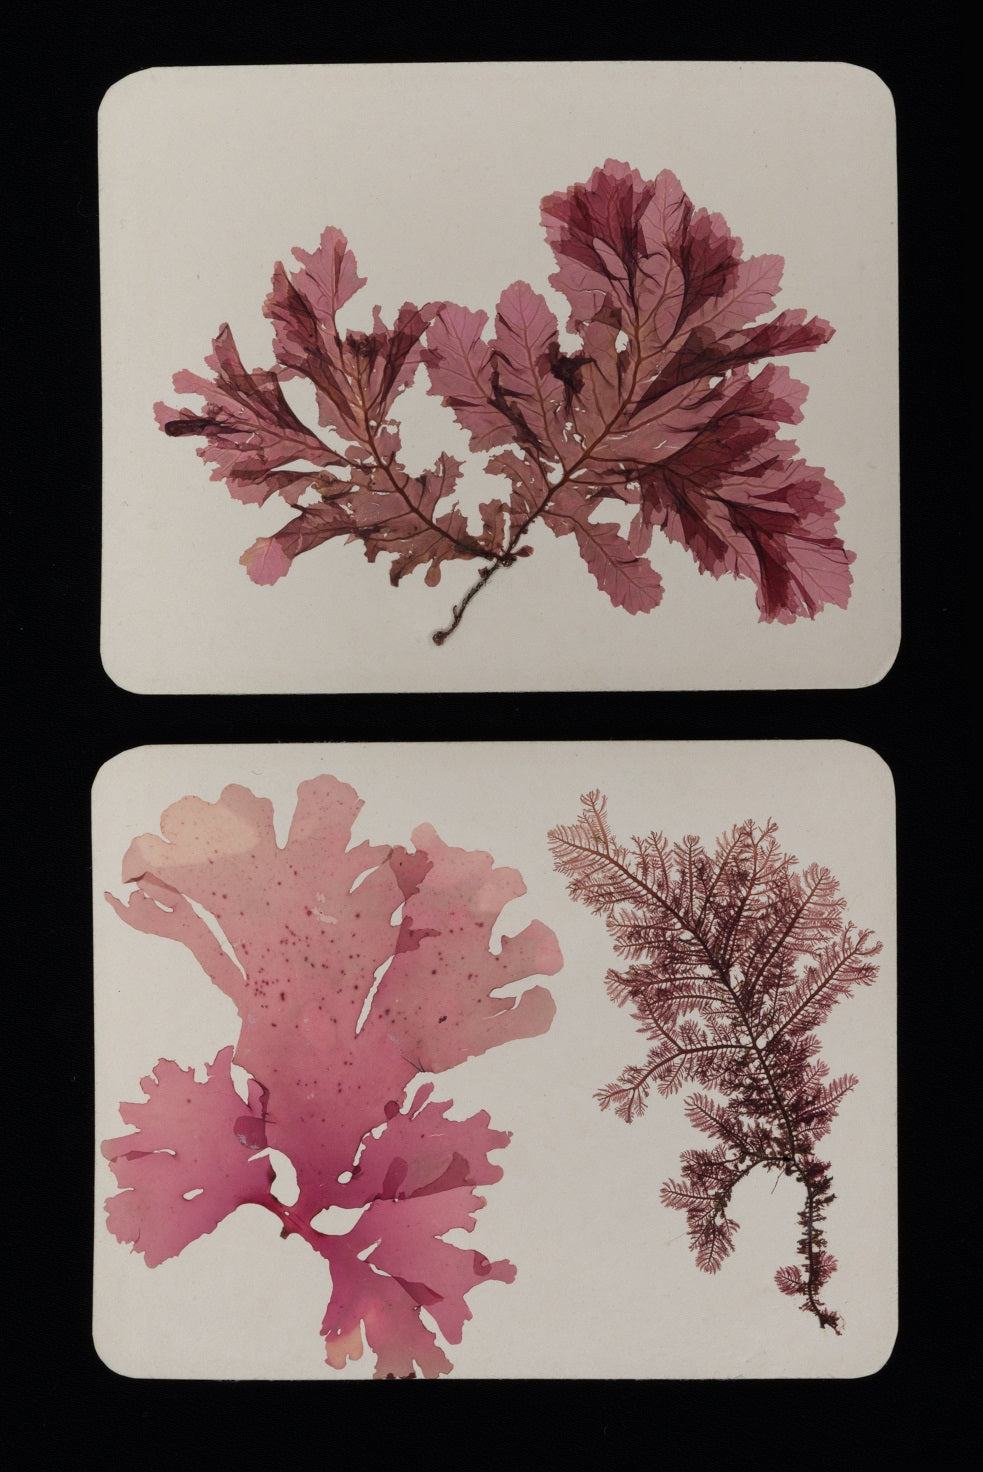 A6 Greeting Card: Red seaweeds - Phycordrys rubens, collected by Mrs A. Miller